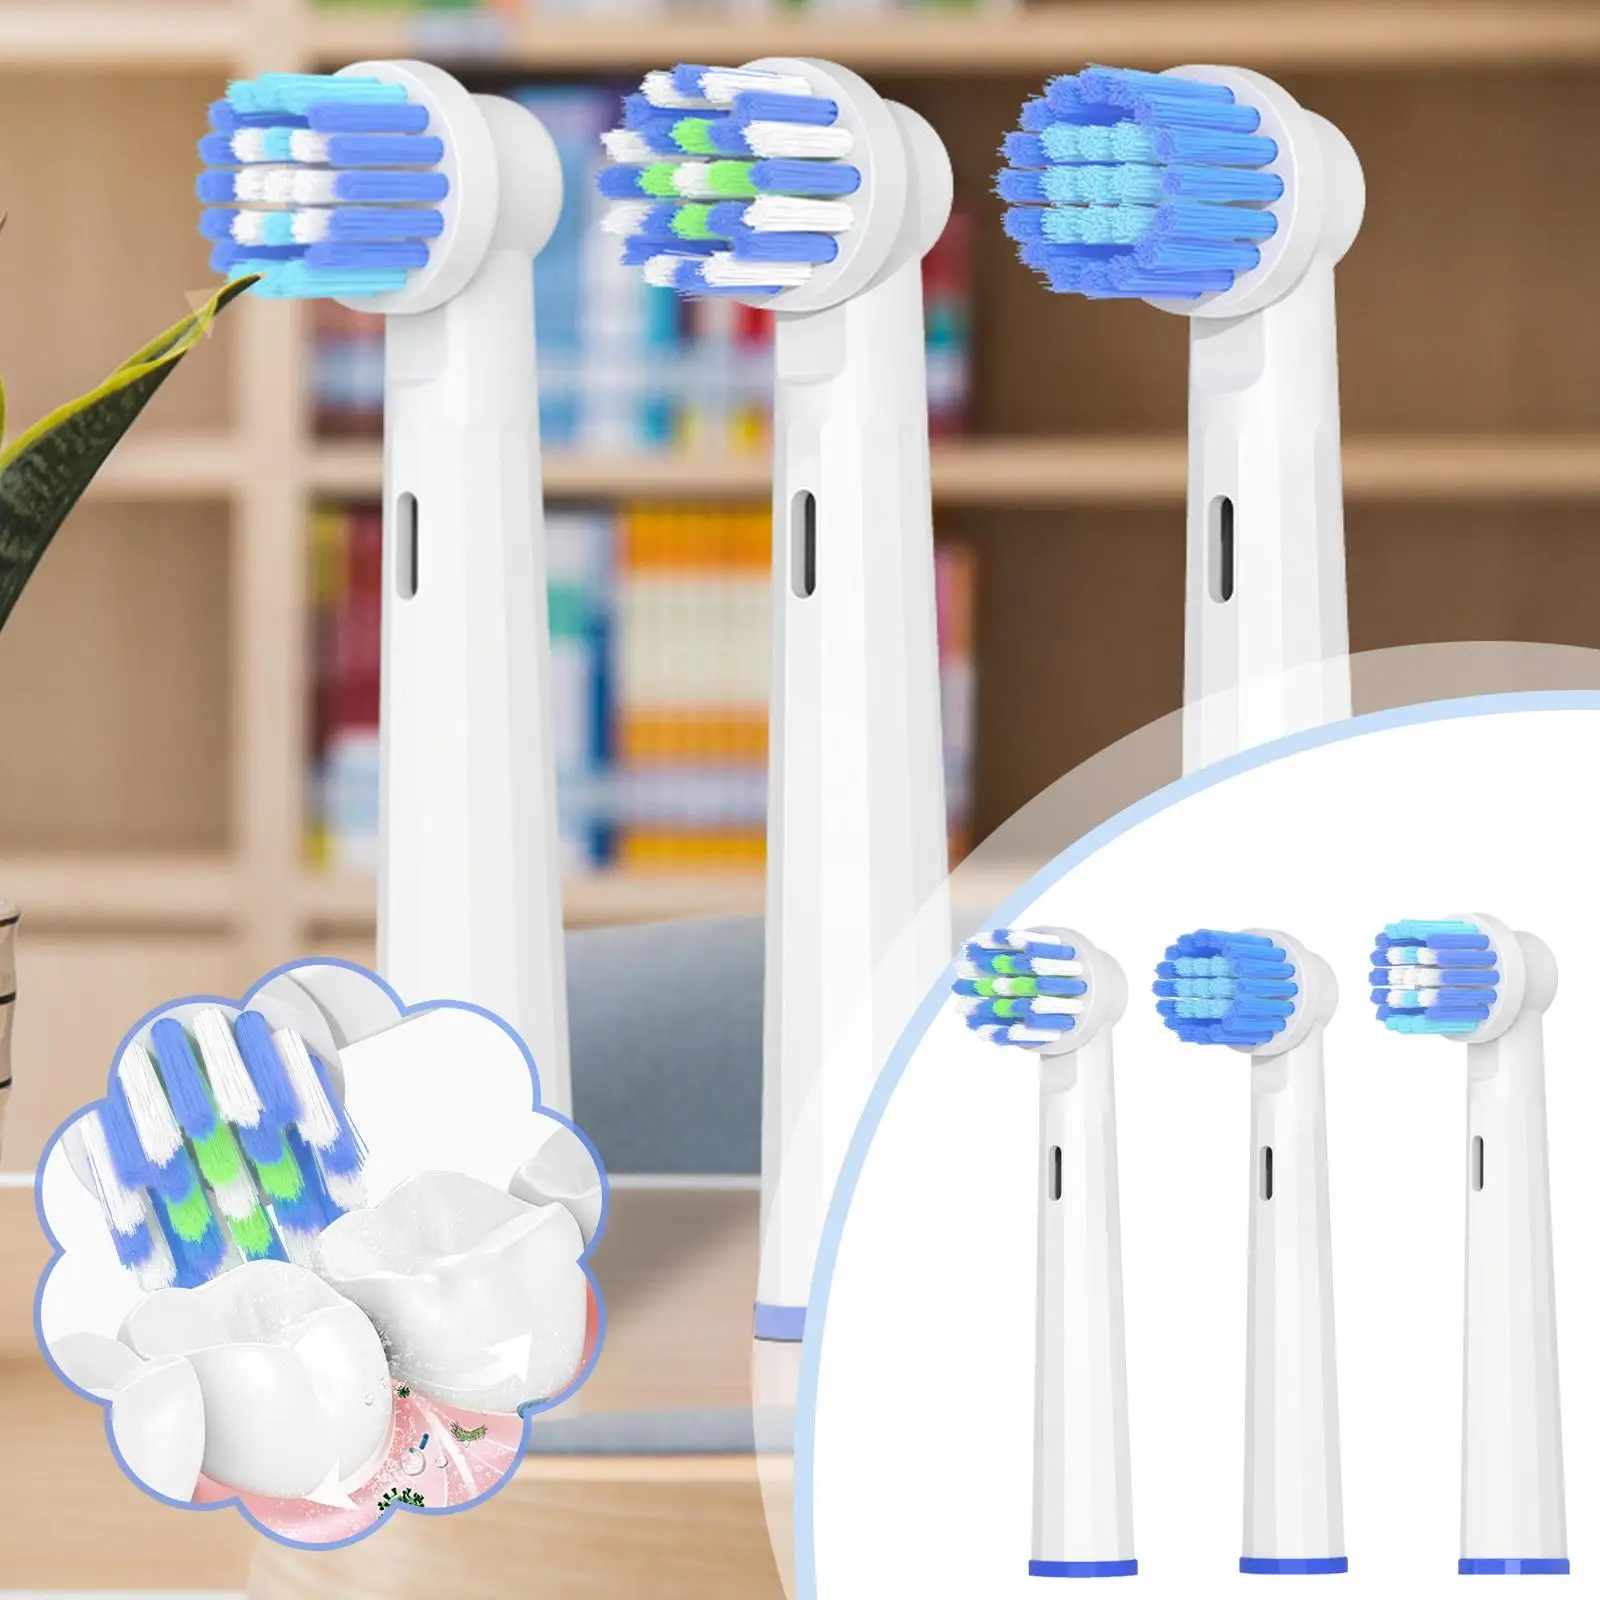 

Toothbrushes Head Professional Replacement Electric Toothbrush Heads for oral-B EB17/EB20/EB50 Sensitive Care Precise Cleaning